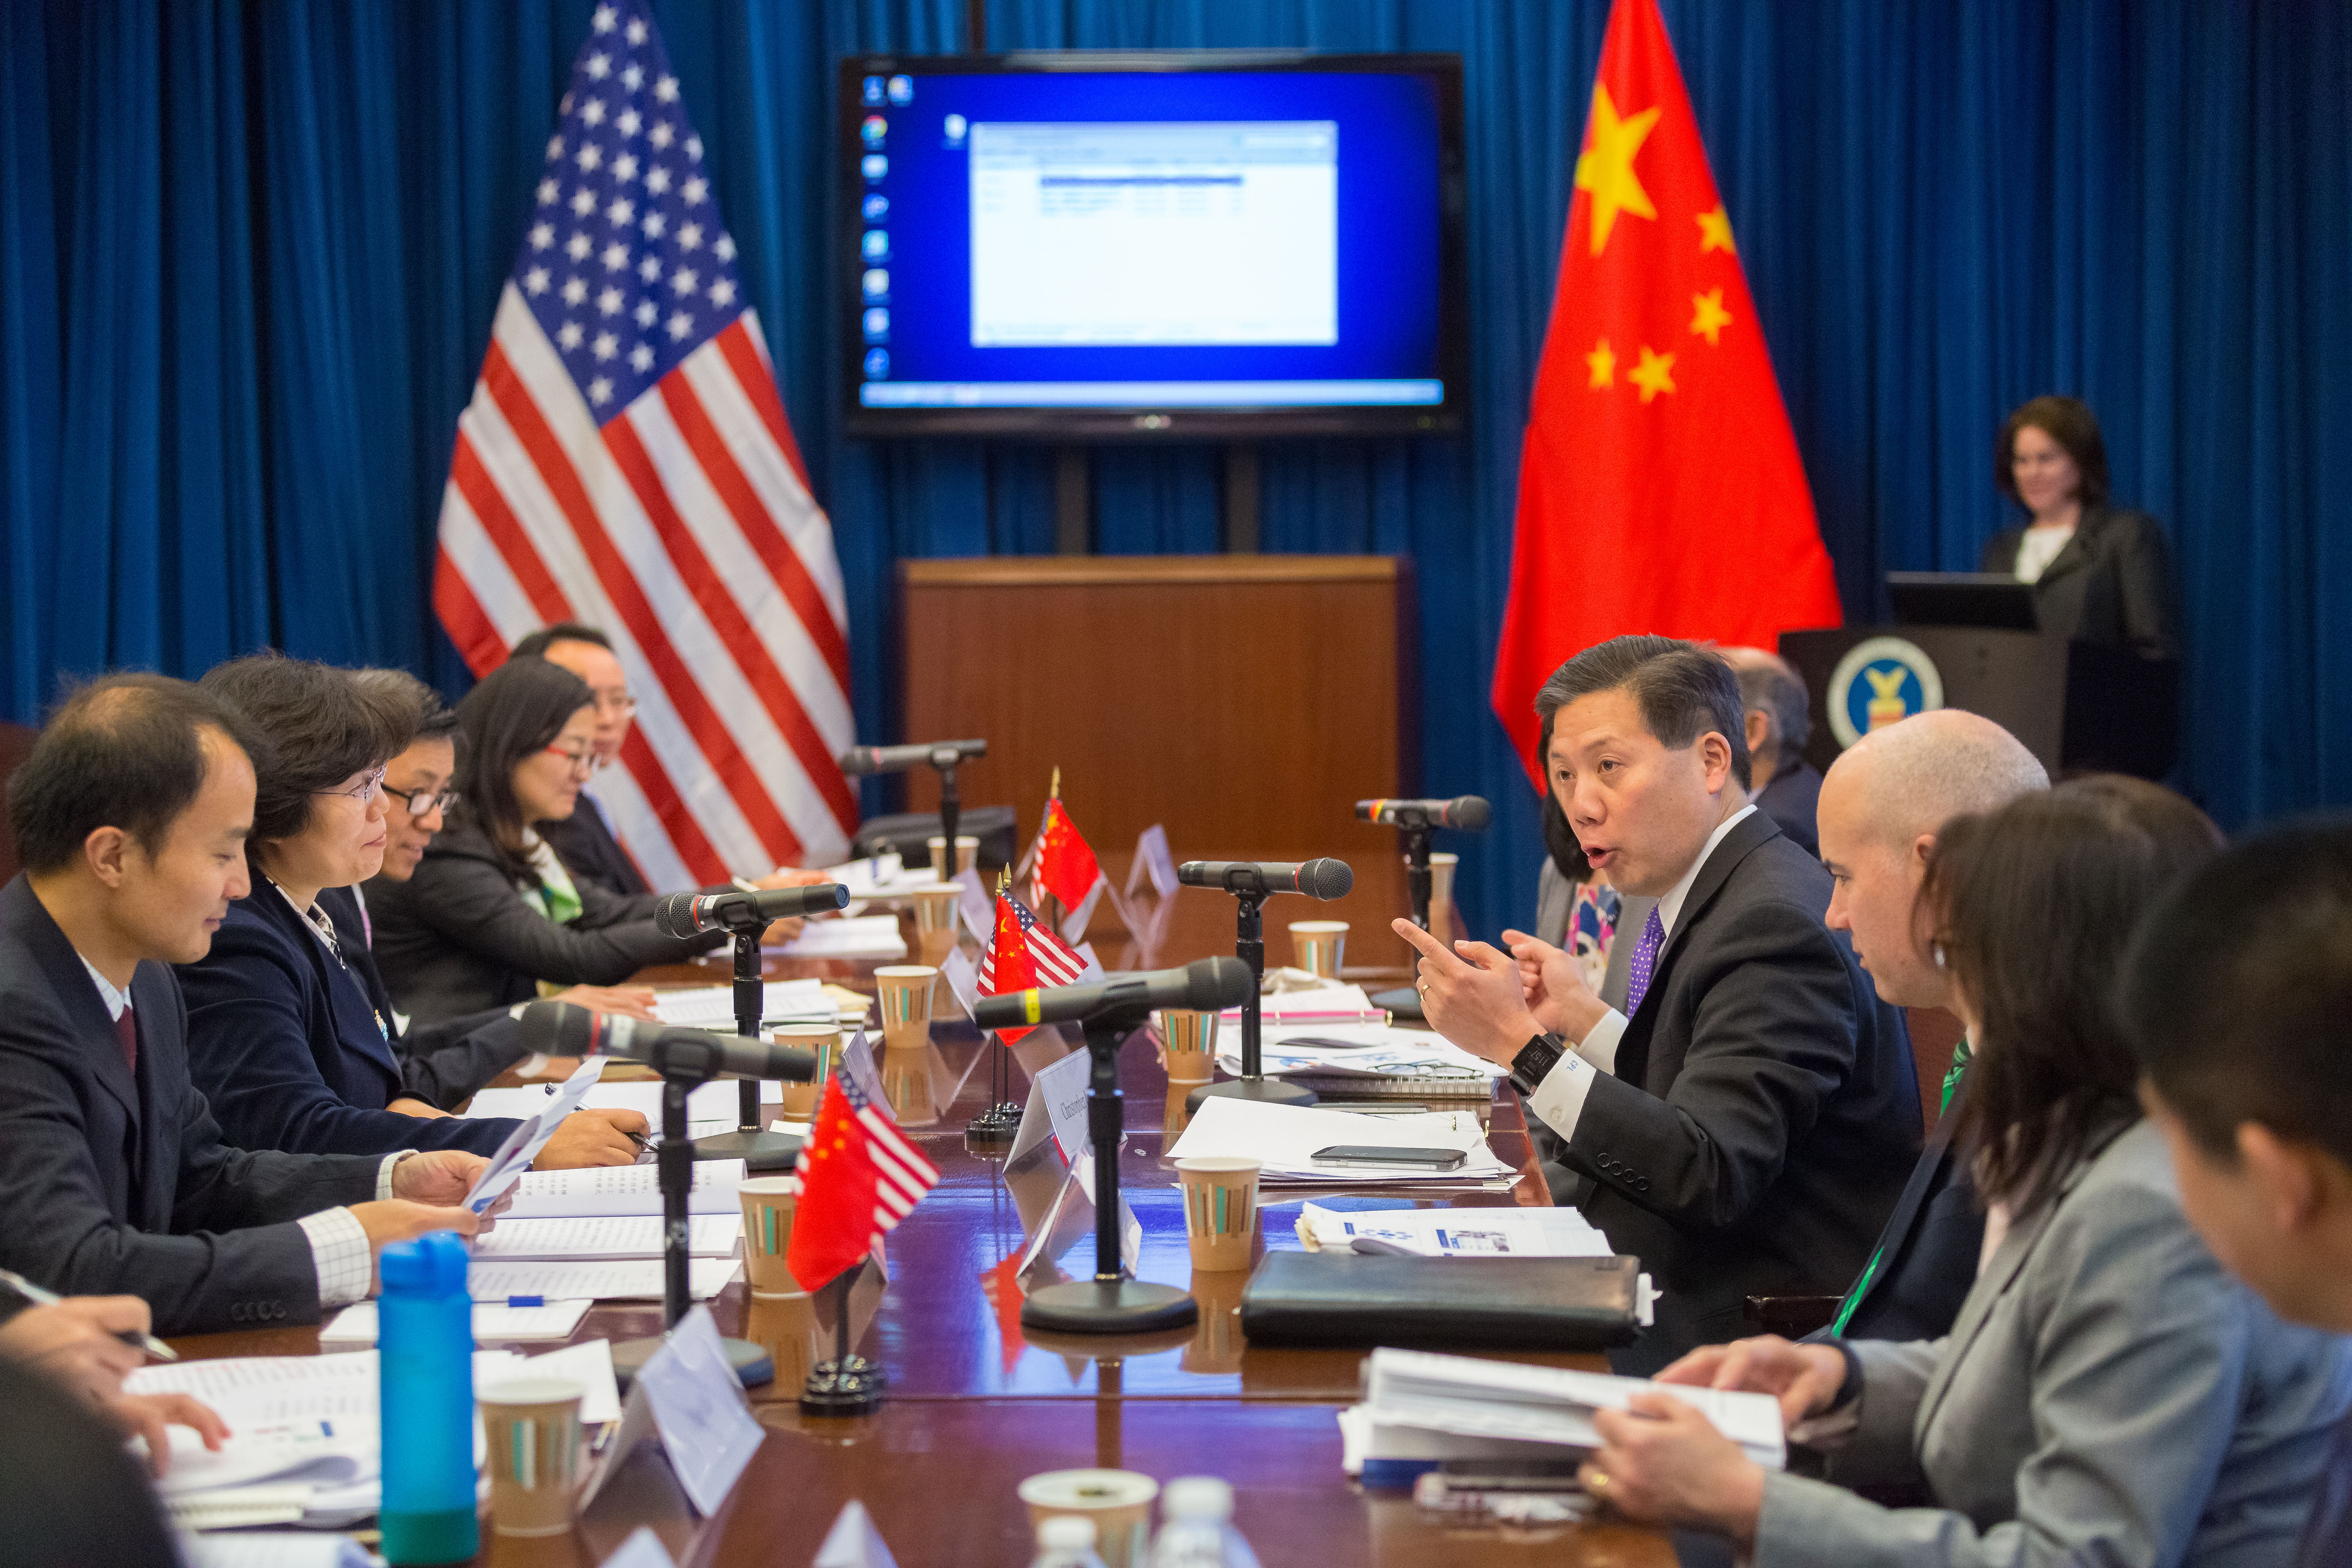 Deputy Secretary Lu (fourth from the right) welcomes Vice Minister of Labor Zhang Yizhen (second from left) of China at the 2016 U.S.-China Labor Dialogue held in Washington.